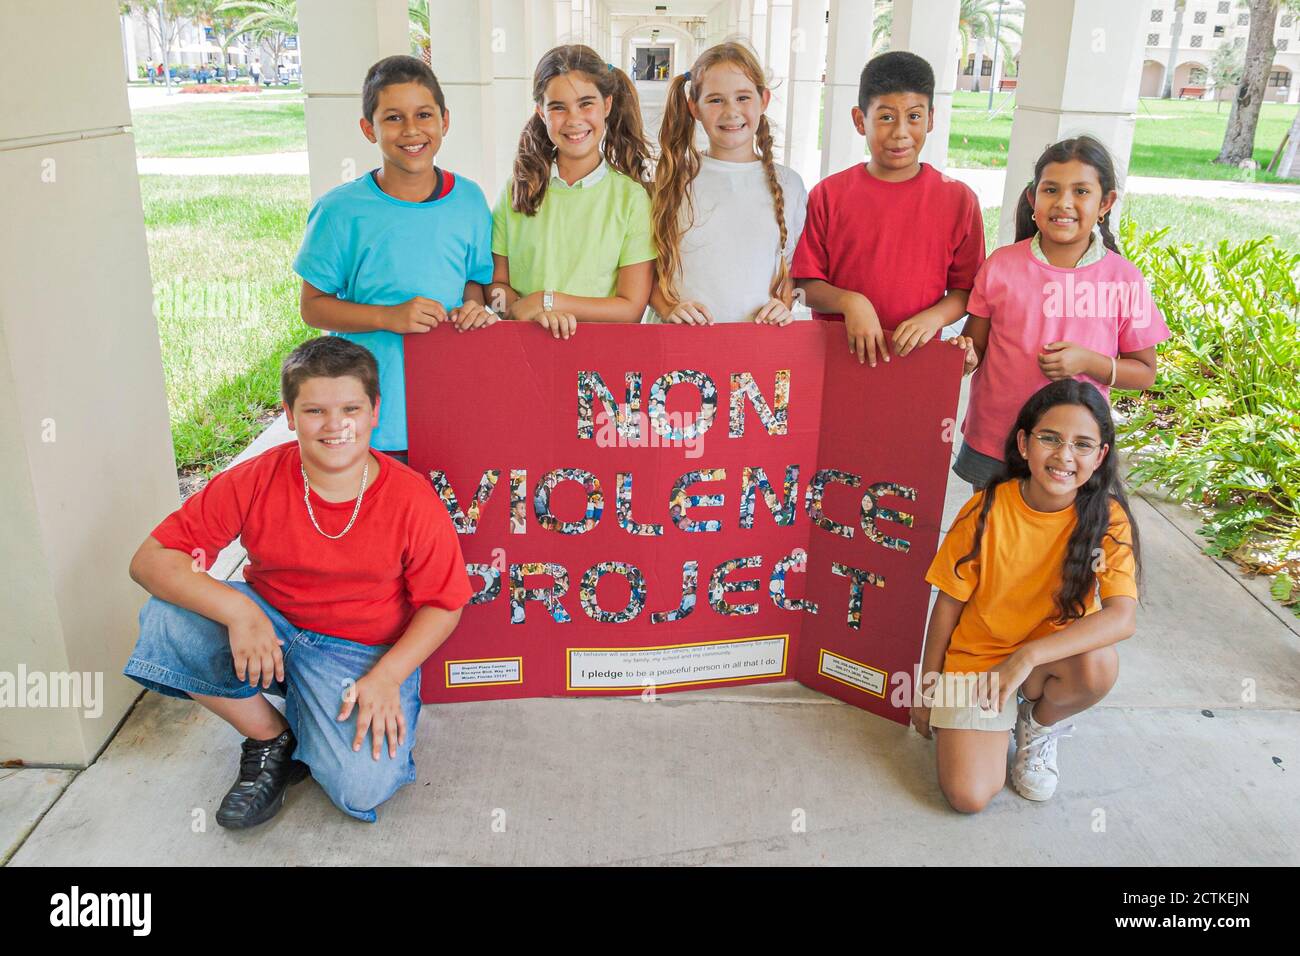 Miami Florida,Non Violence Project USA,teaching student students non violent behavior,boys boy girl girlss smiles smiling,hold holding poster sign,His Stock Photo